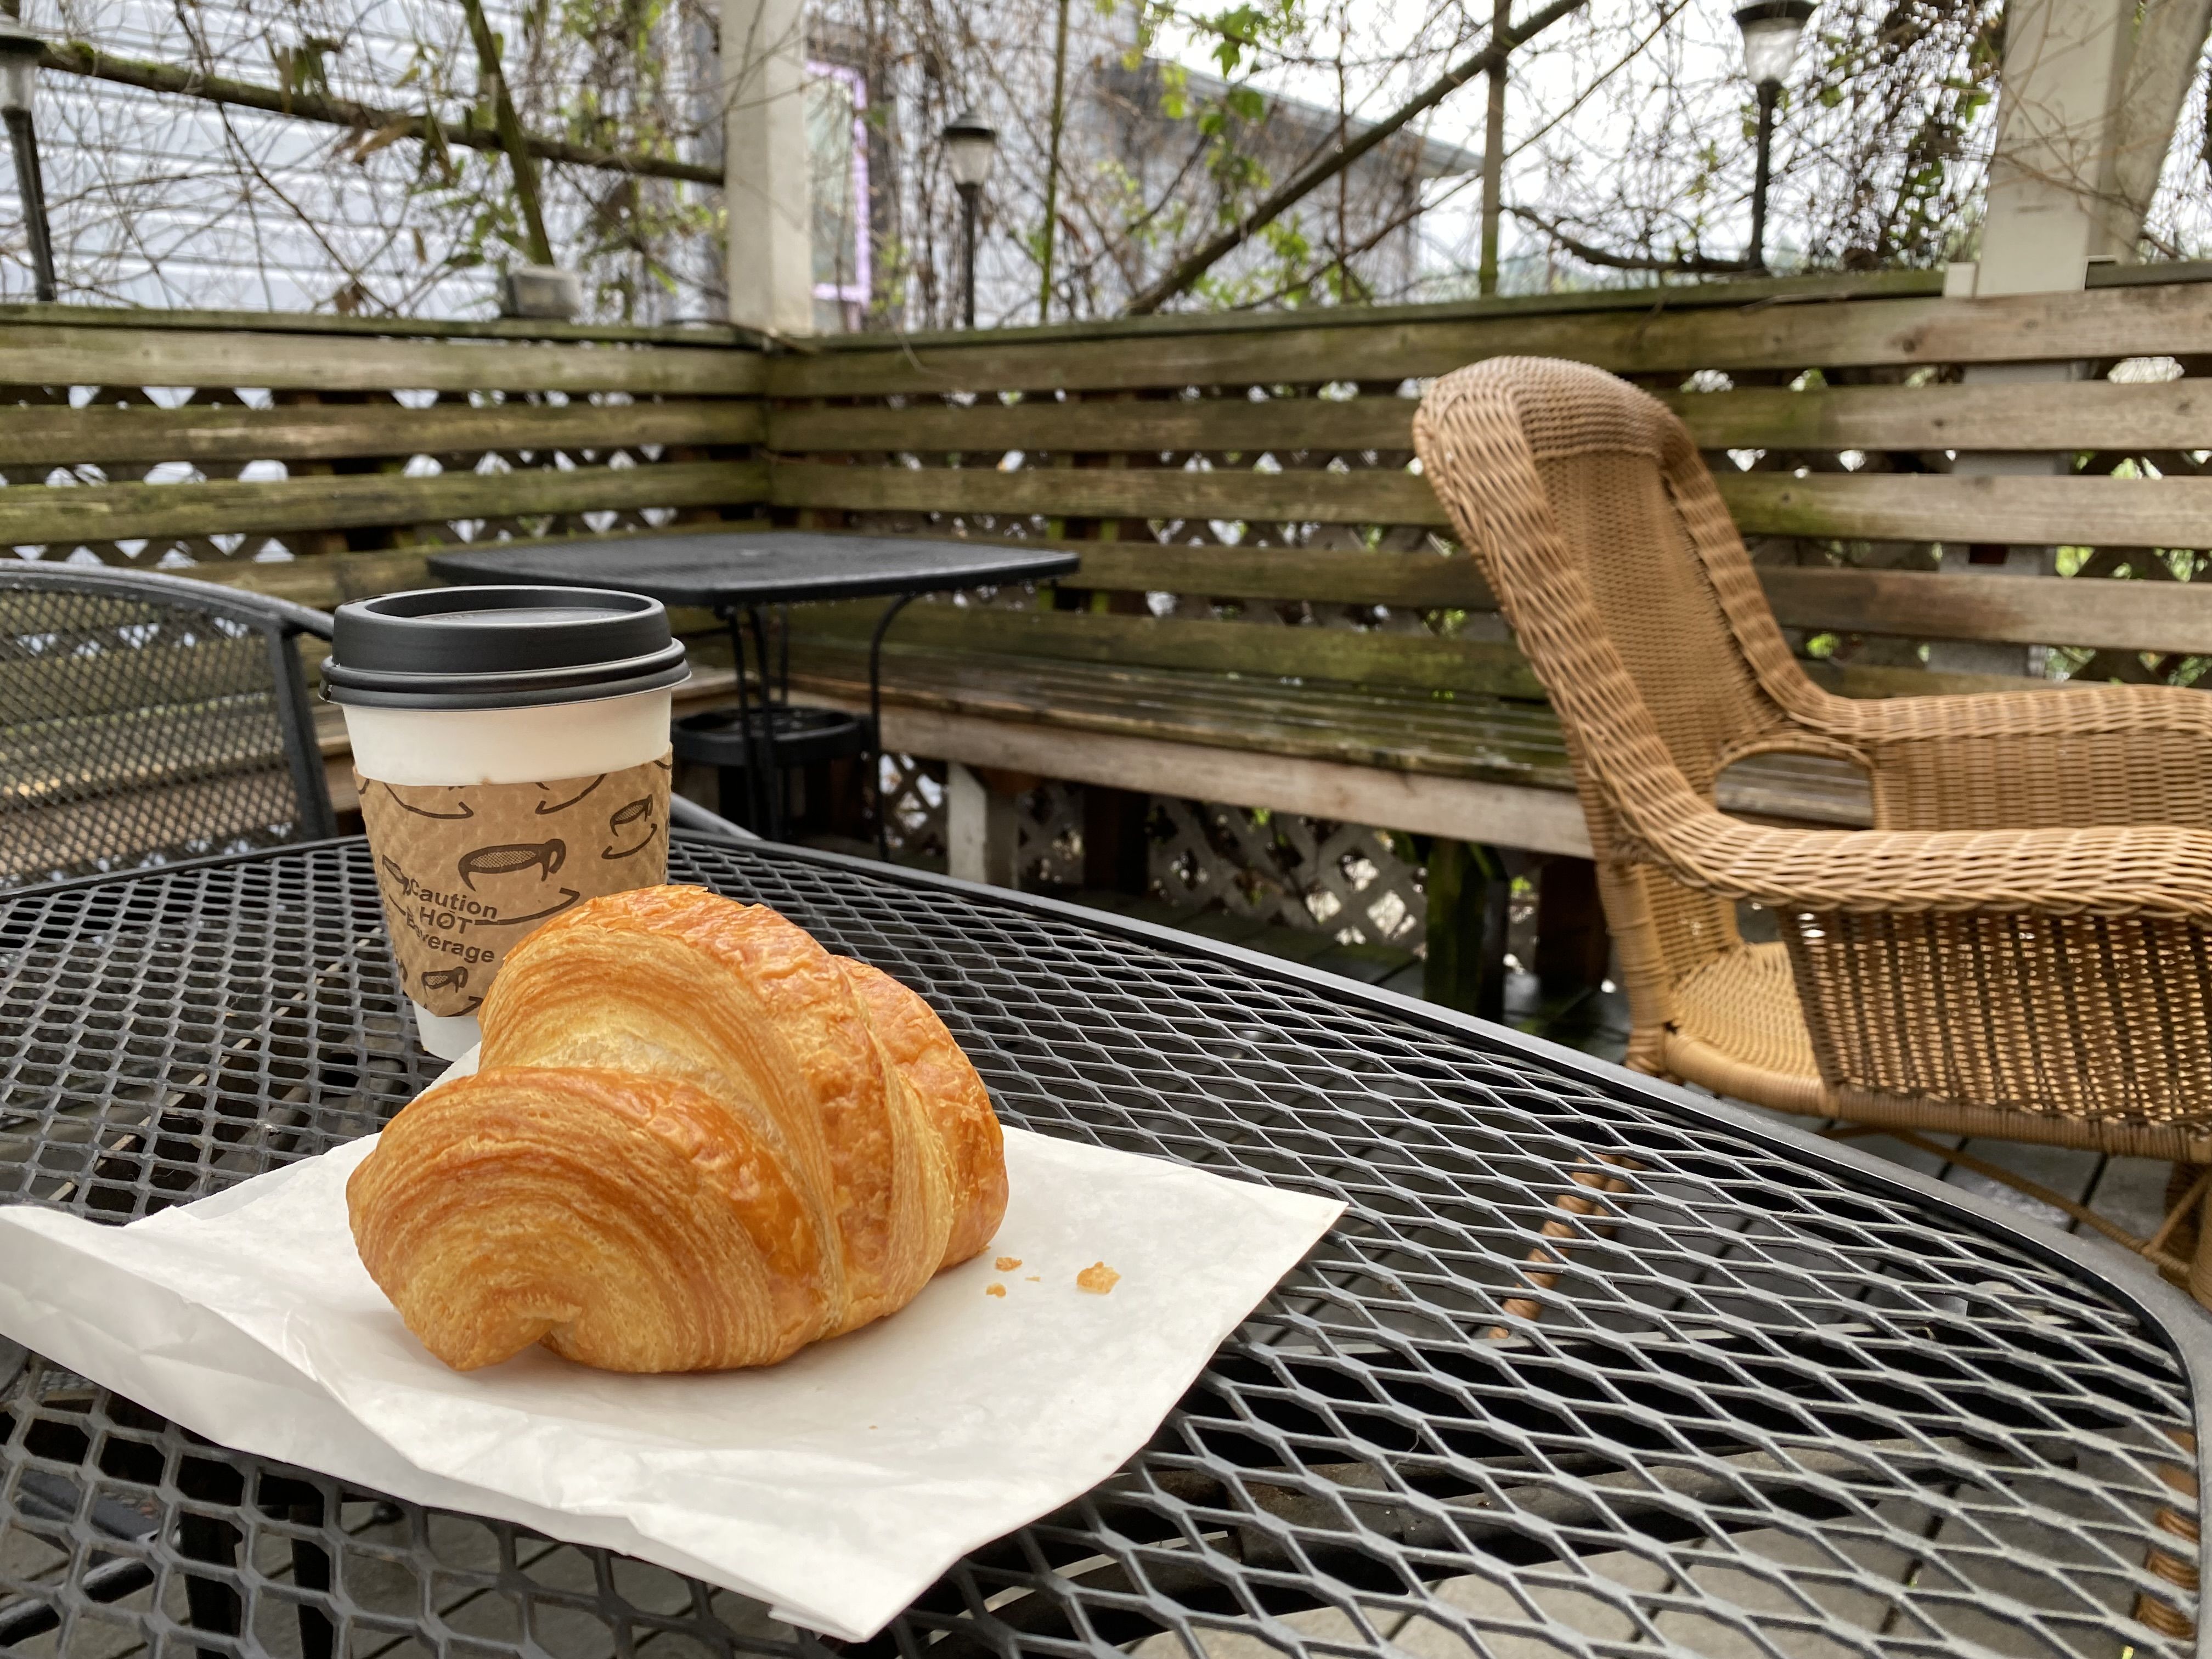 A croissant and a cup of coffee in a to go cup sitting on a metal outdoor cafe table with wooden wall and hanging plants in background.